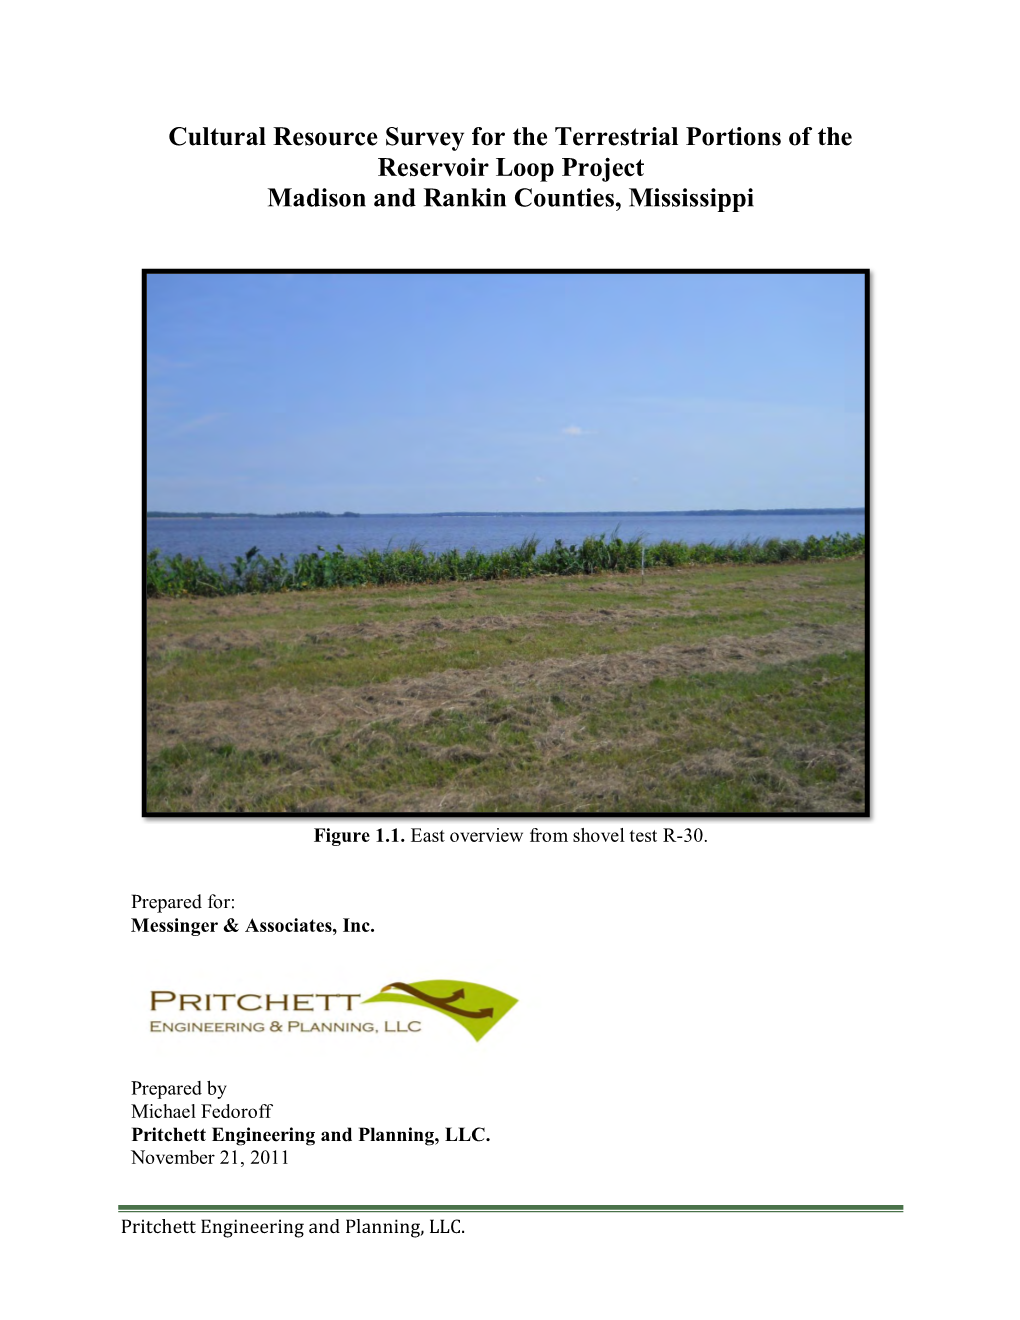 Cultural Resource Survey for the Terrestrial Portions of the Reservoir Loop Project Madison and Rankin Counties, Mississippi